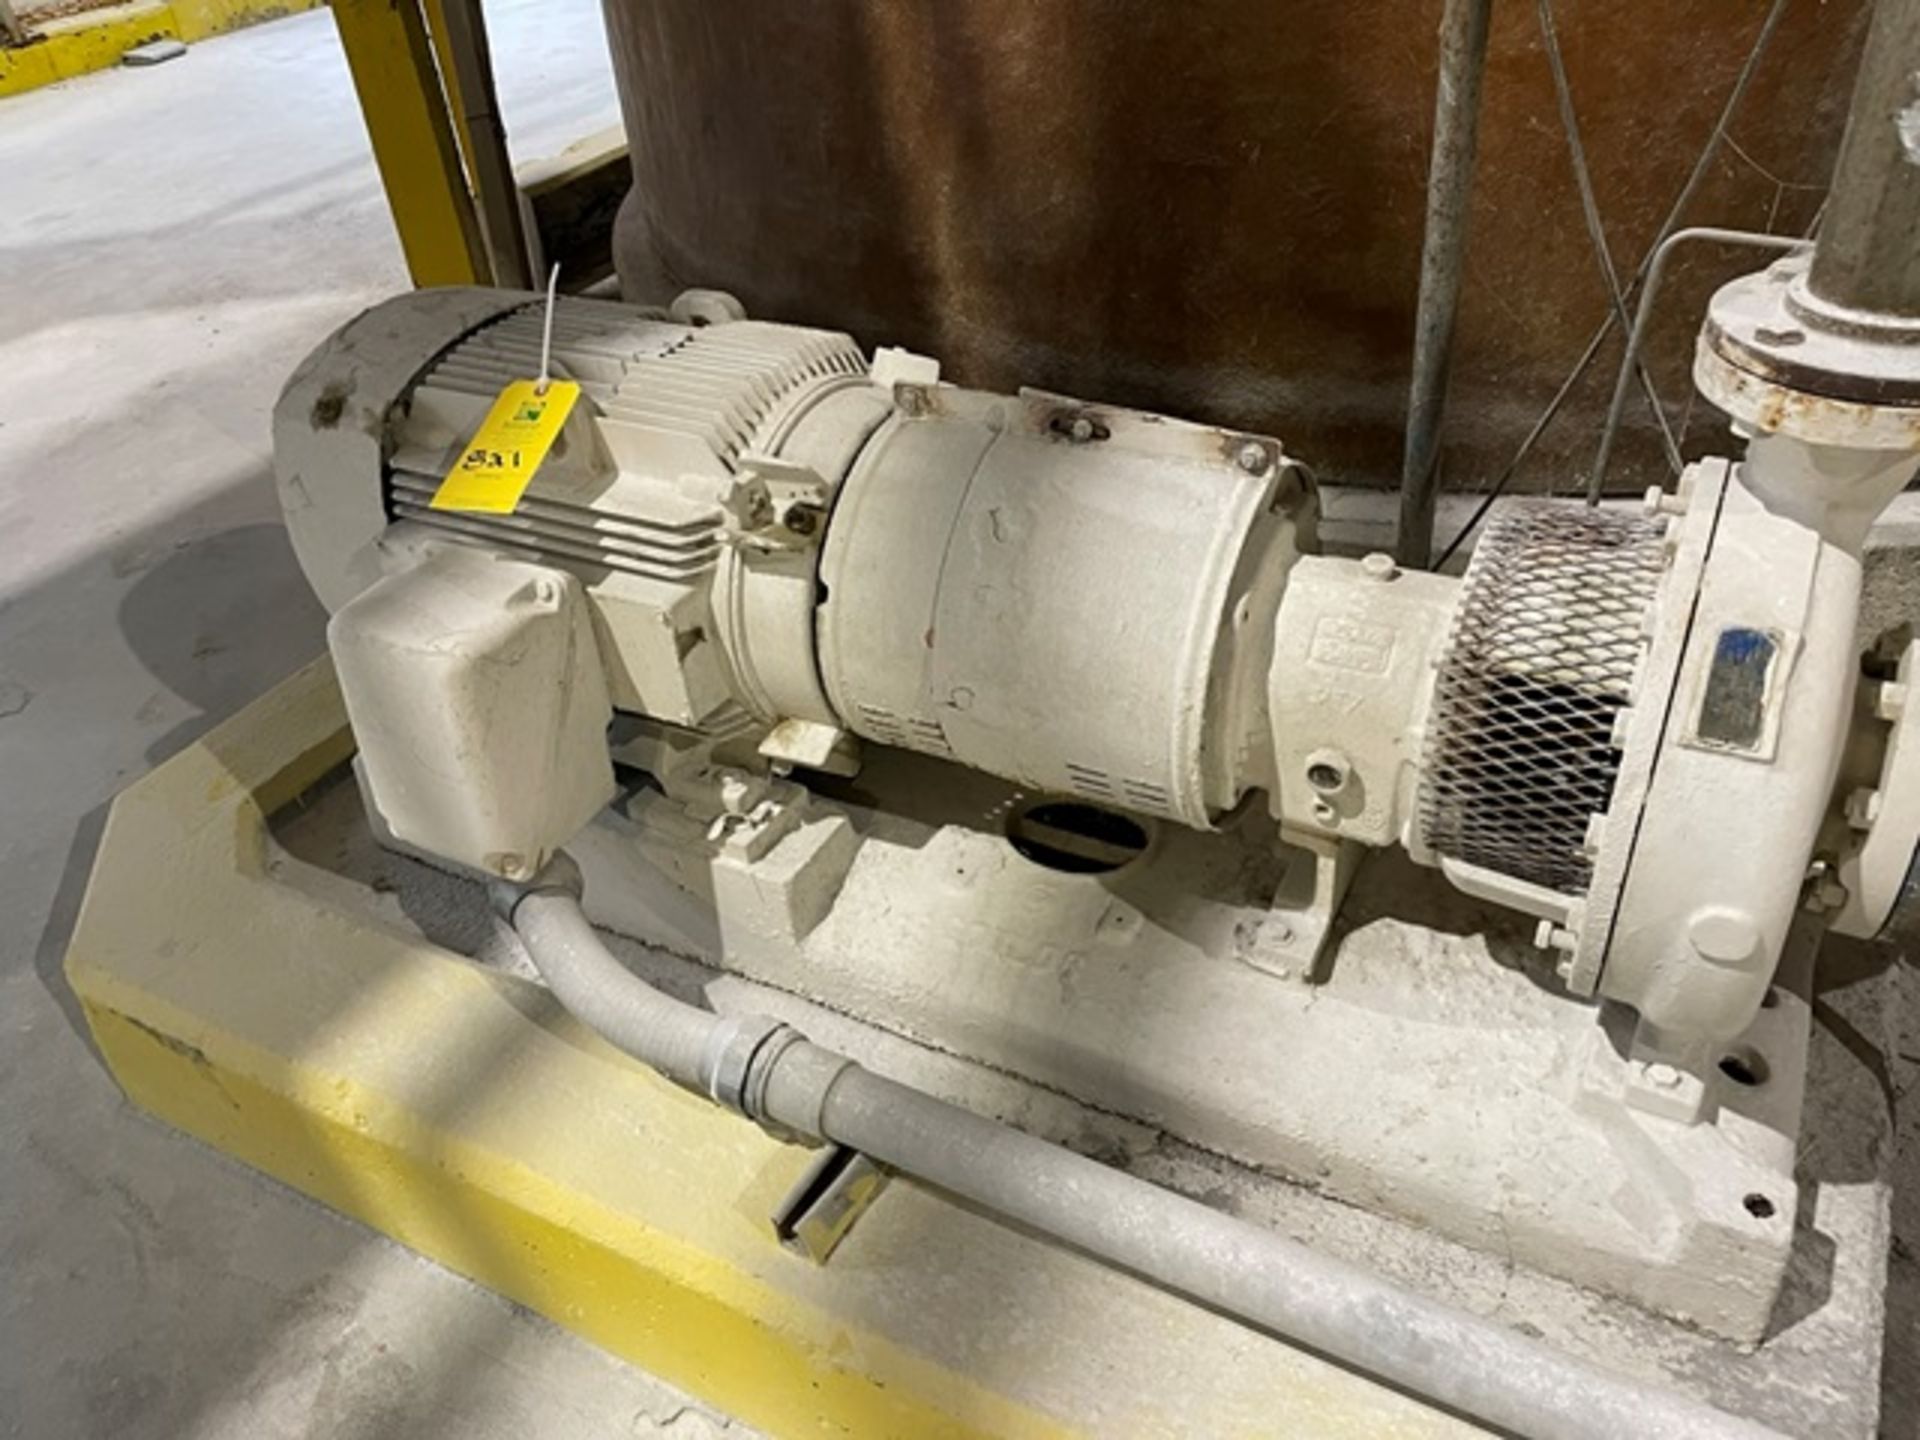 Reliance 40 HP Motor & Goulds MTX Pump, 3 x 4 x 16, Rigging & Loading Fee: $300